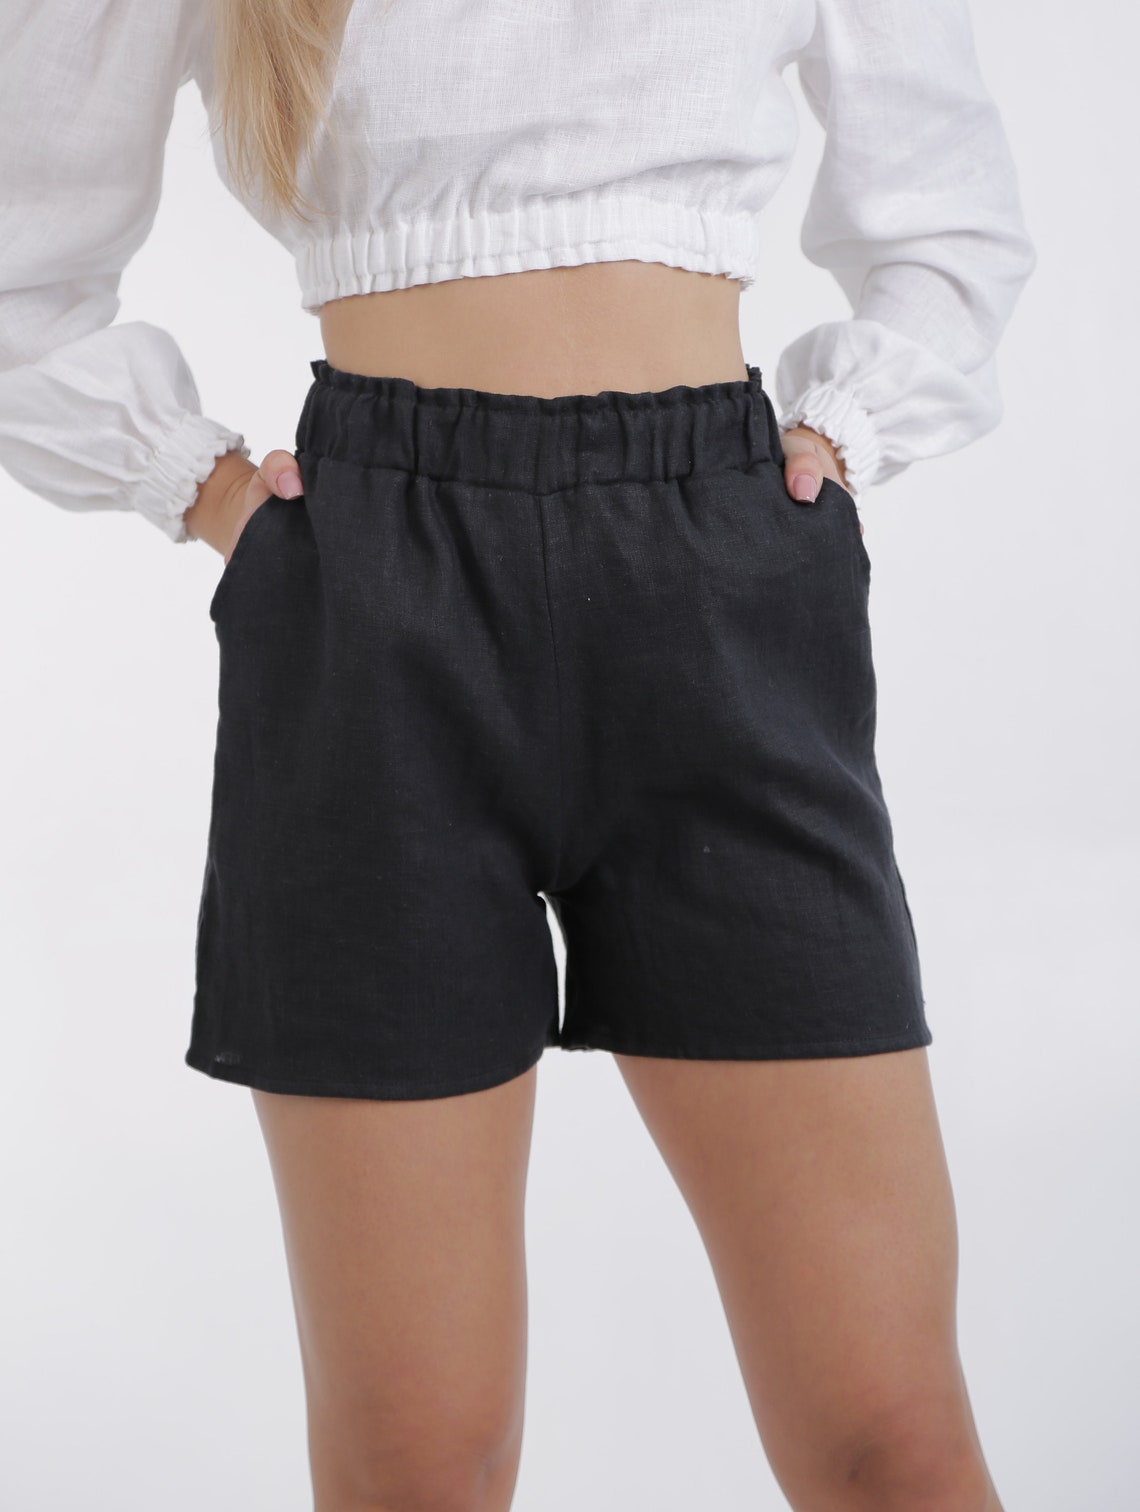 Black Linen Women Shorts With Pockets Shorts High Waist For Etsy